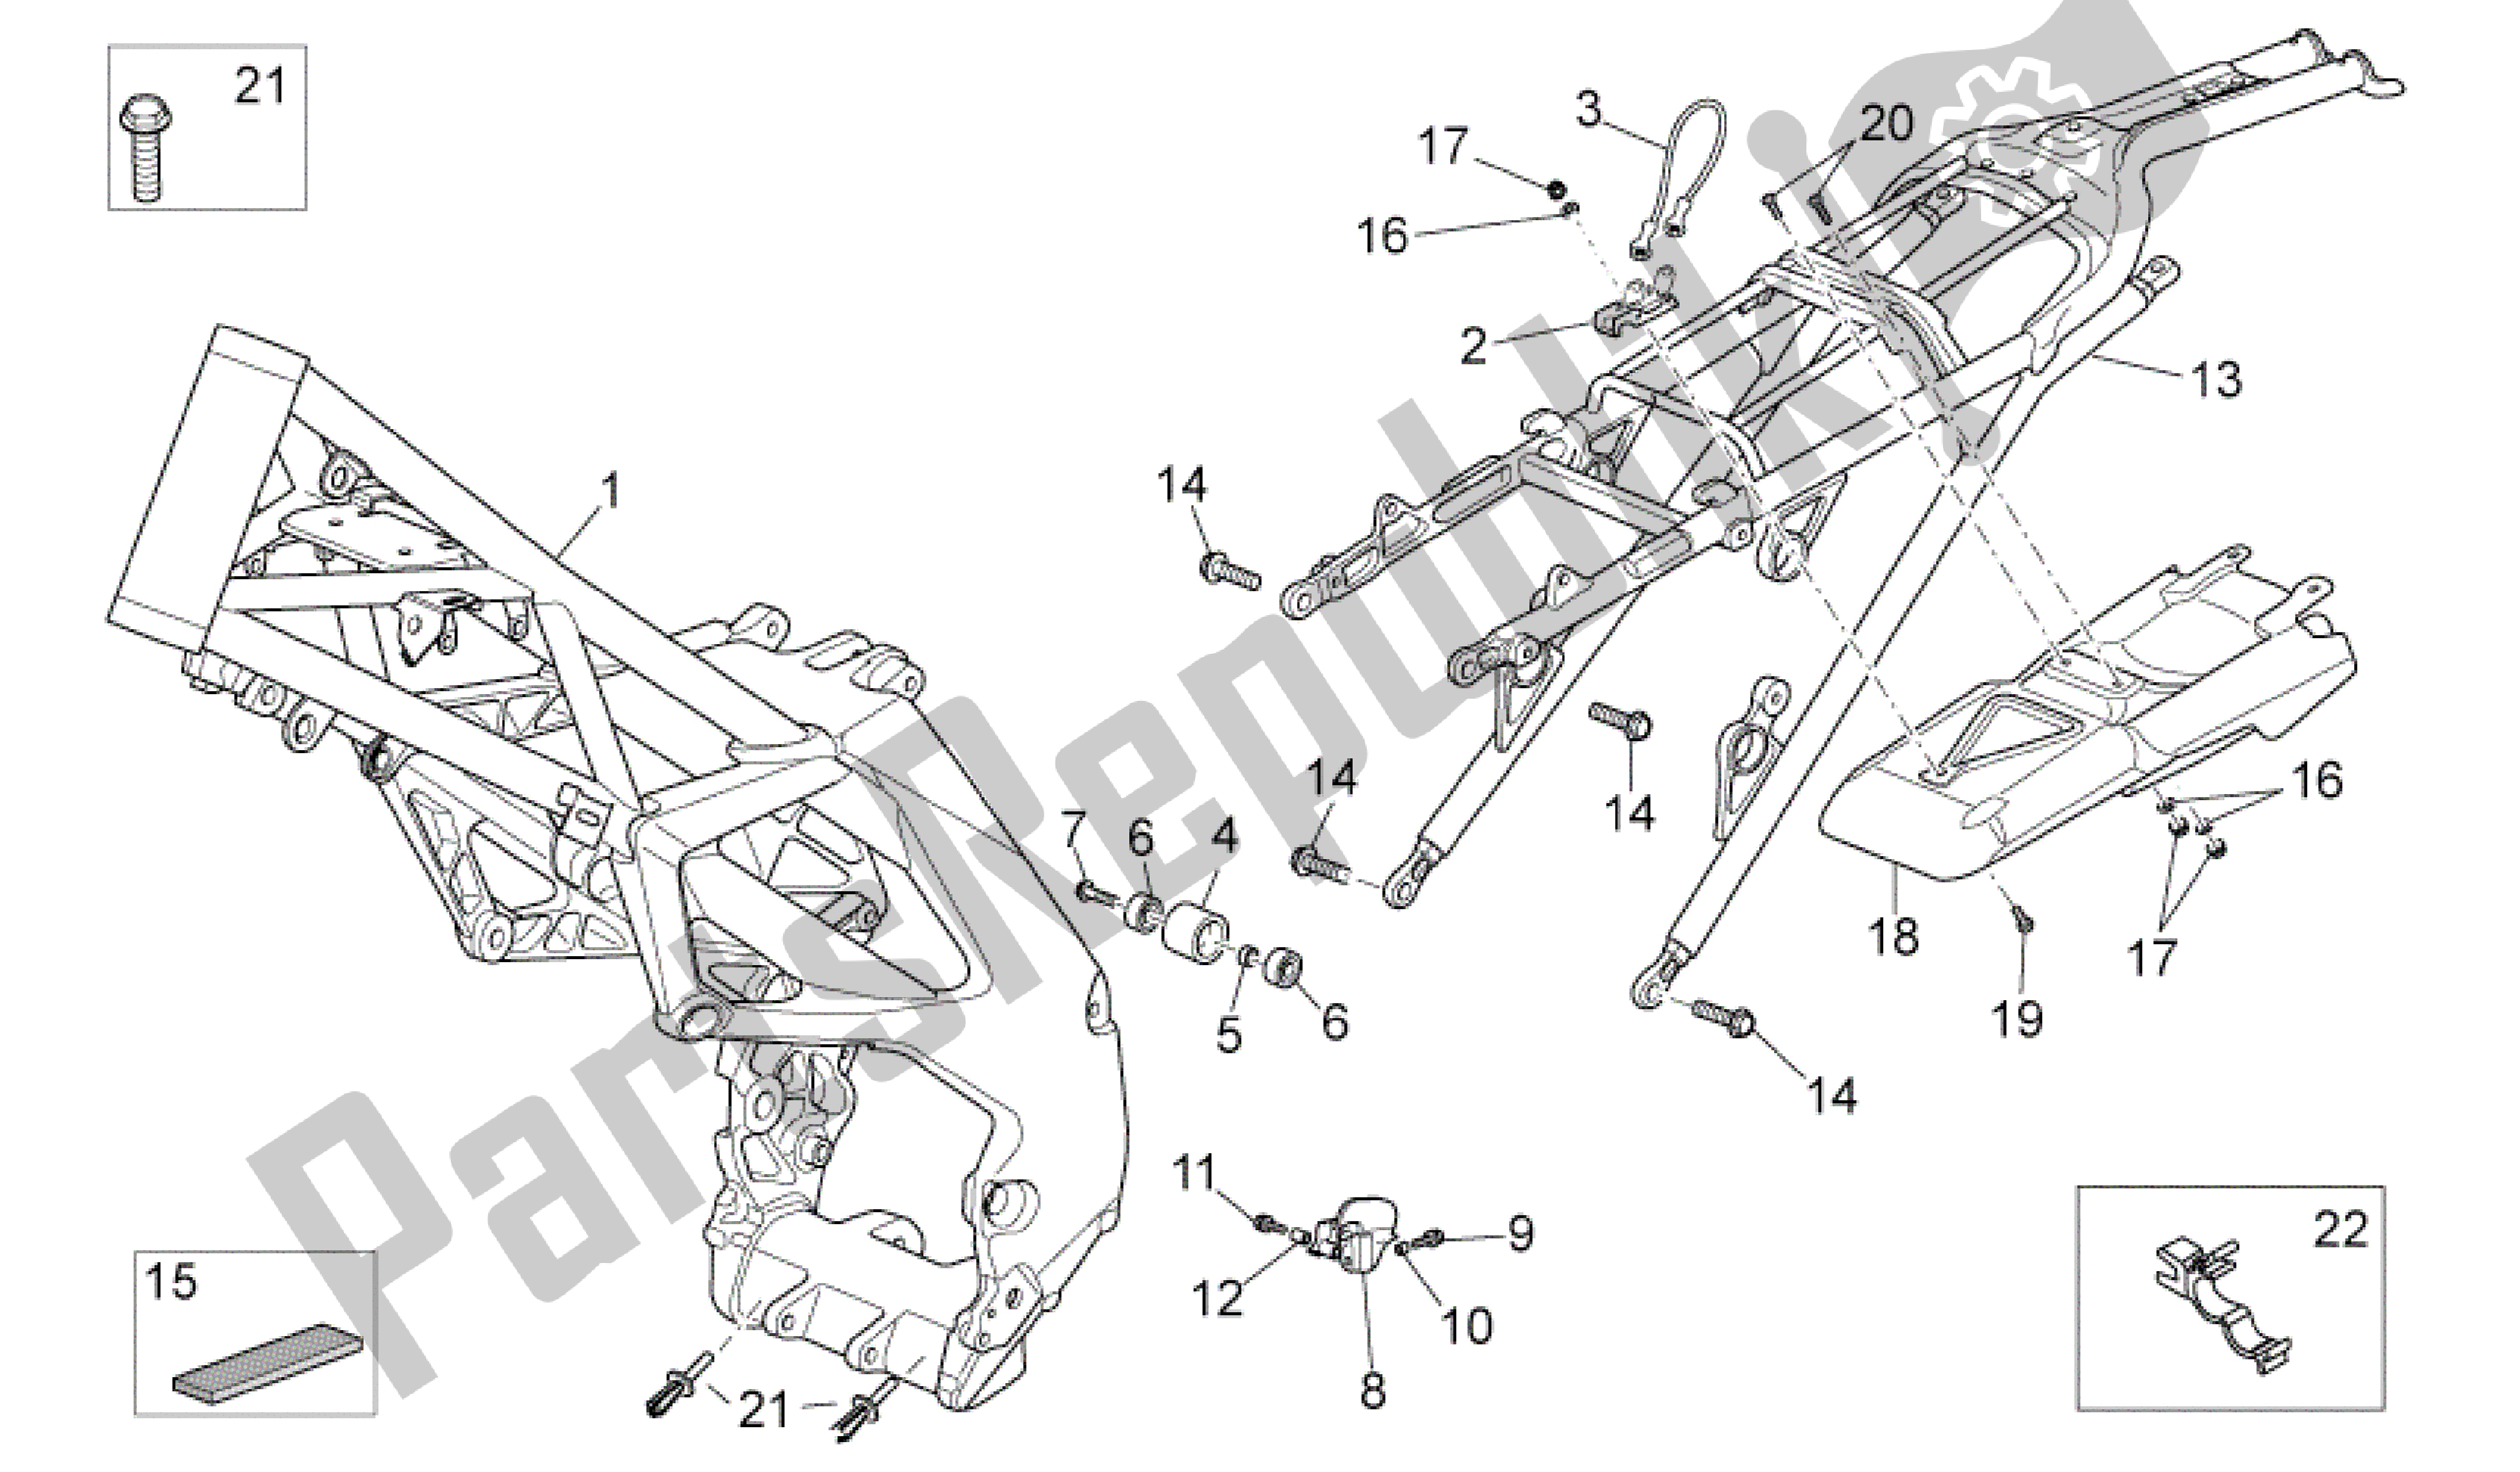 All parts for the Frame of the Aprilia RXV 450 2009 - 2011